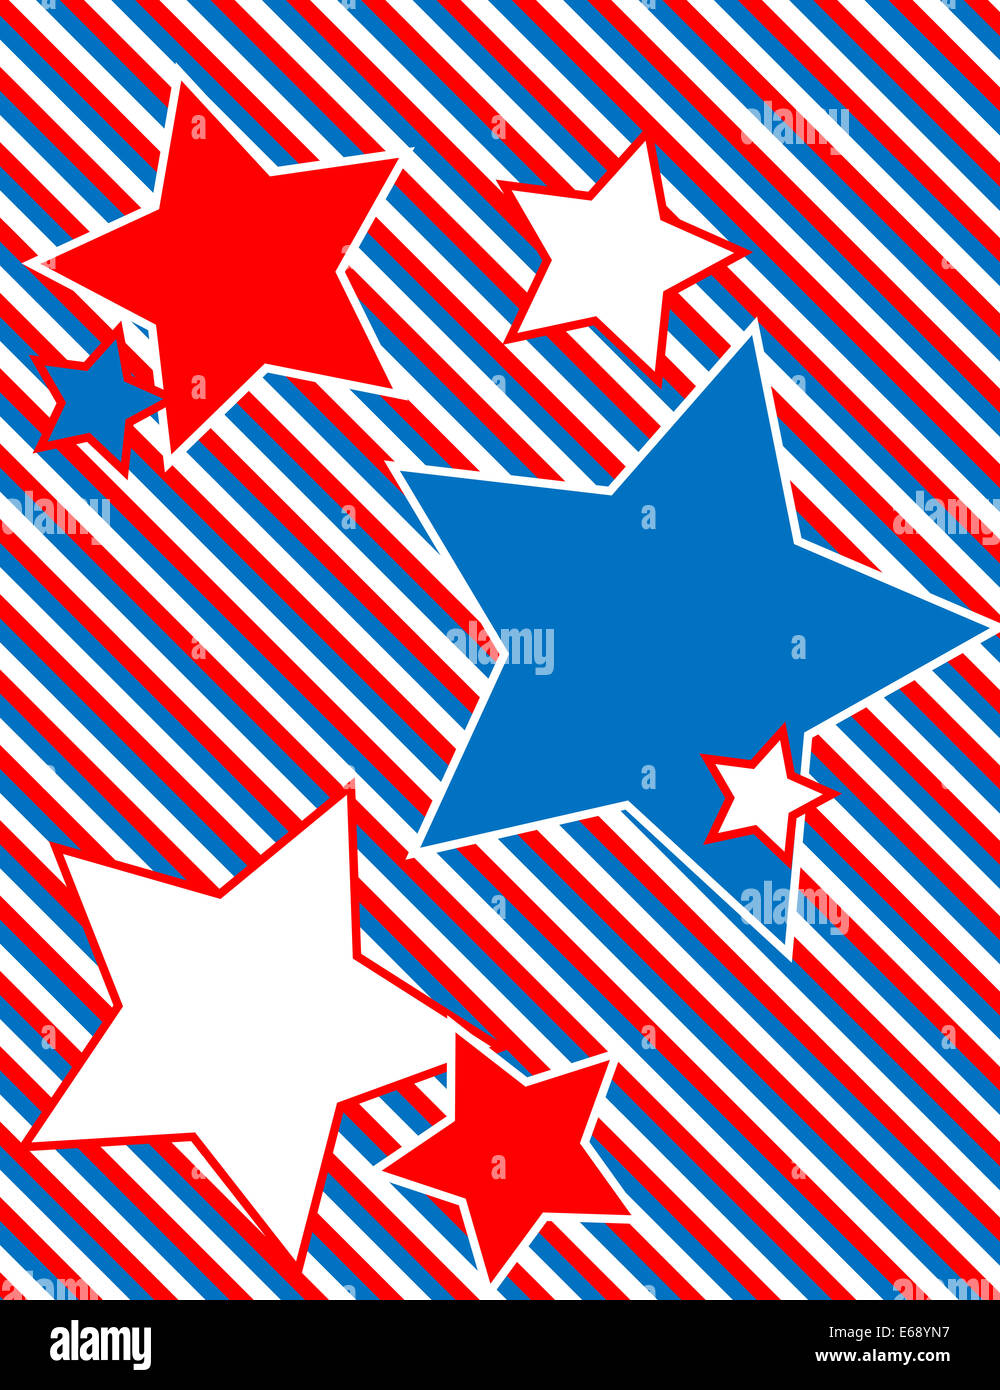 Red, White and blue patriotic star background with a striped background. Stock Photo